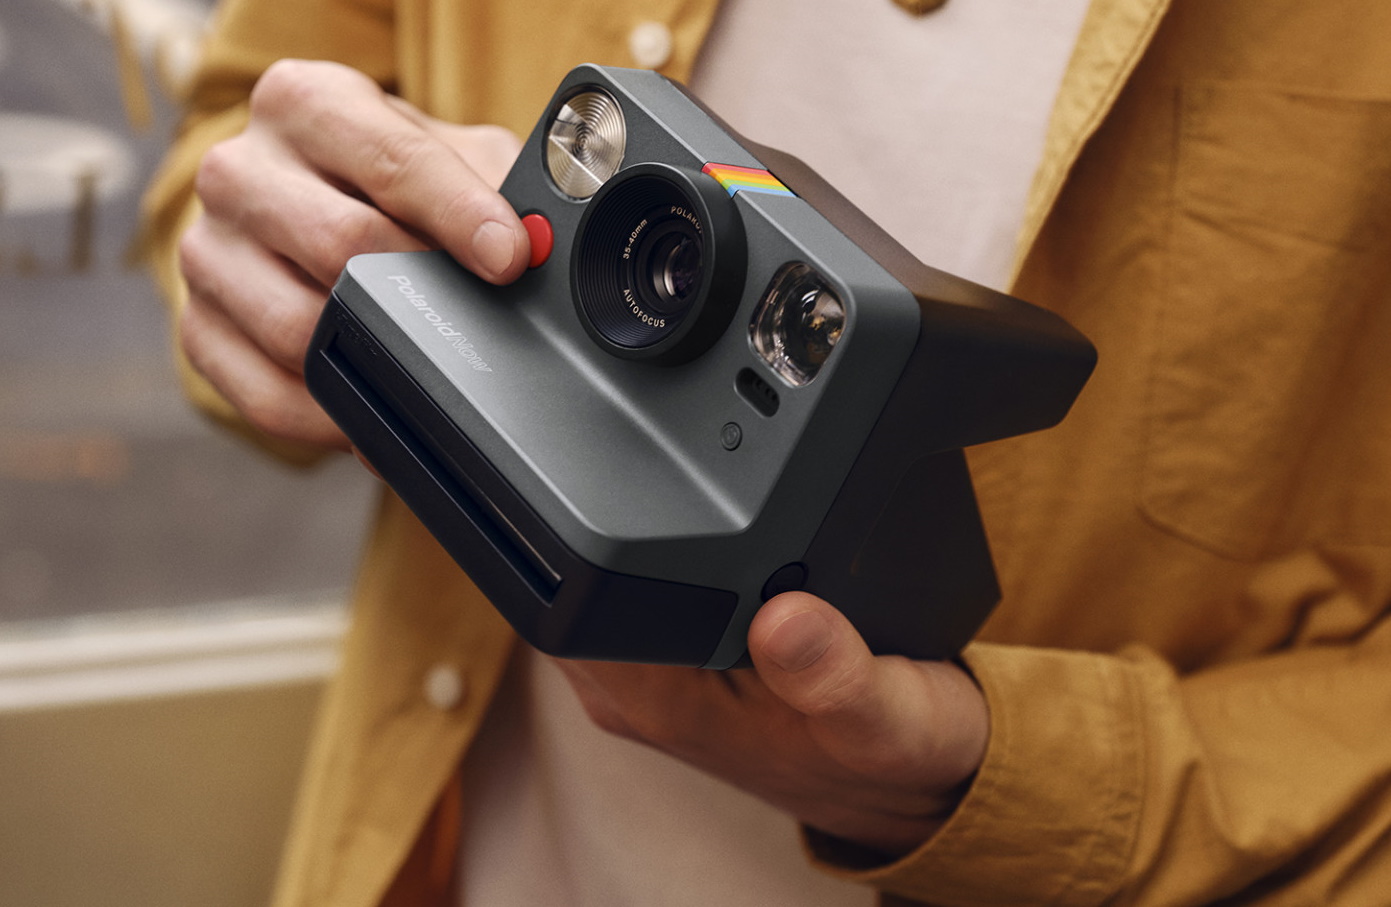 We’ve come full rectangle: Polaroid is reborn out of The Impossible Project